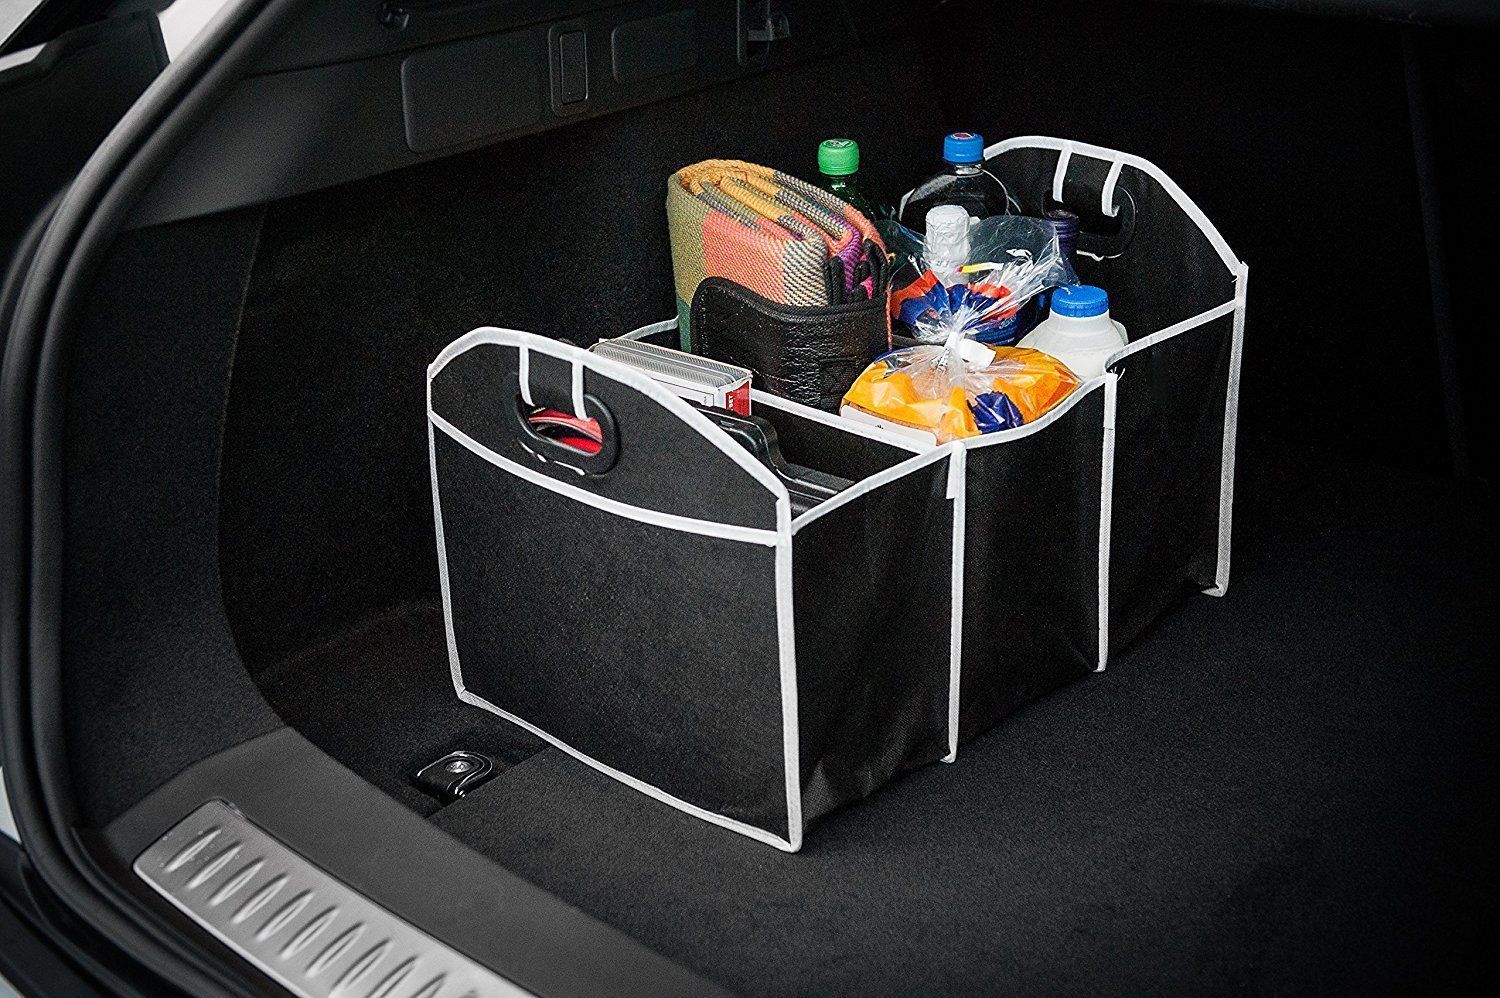 SELUXU 2 in 1 Car Boot Organiser Shopping Tidy Heavy Duty Collapsible Foldable Storage,Auto Car Storage Organiser,Foldable Storage Boot Organiser Box 